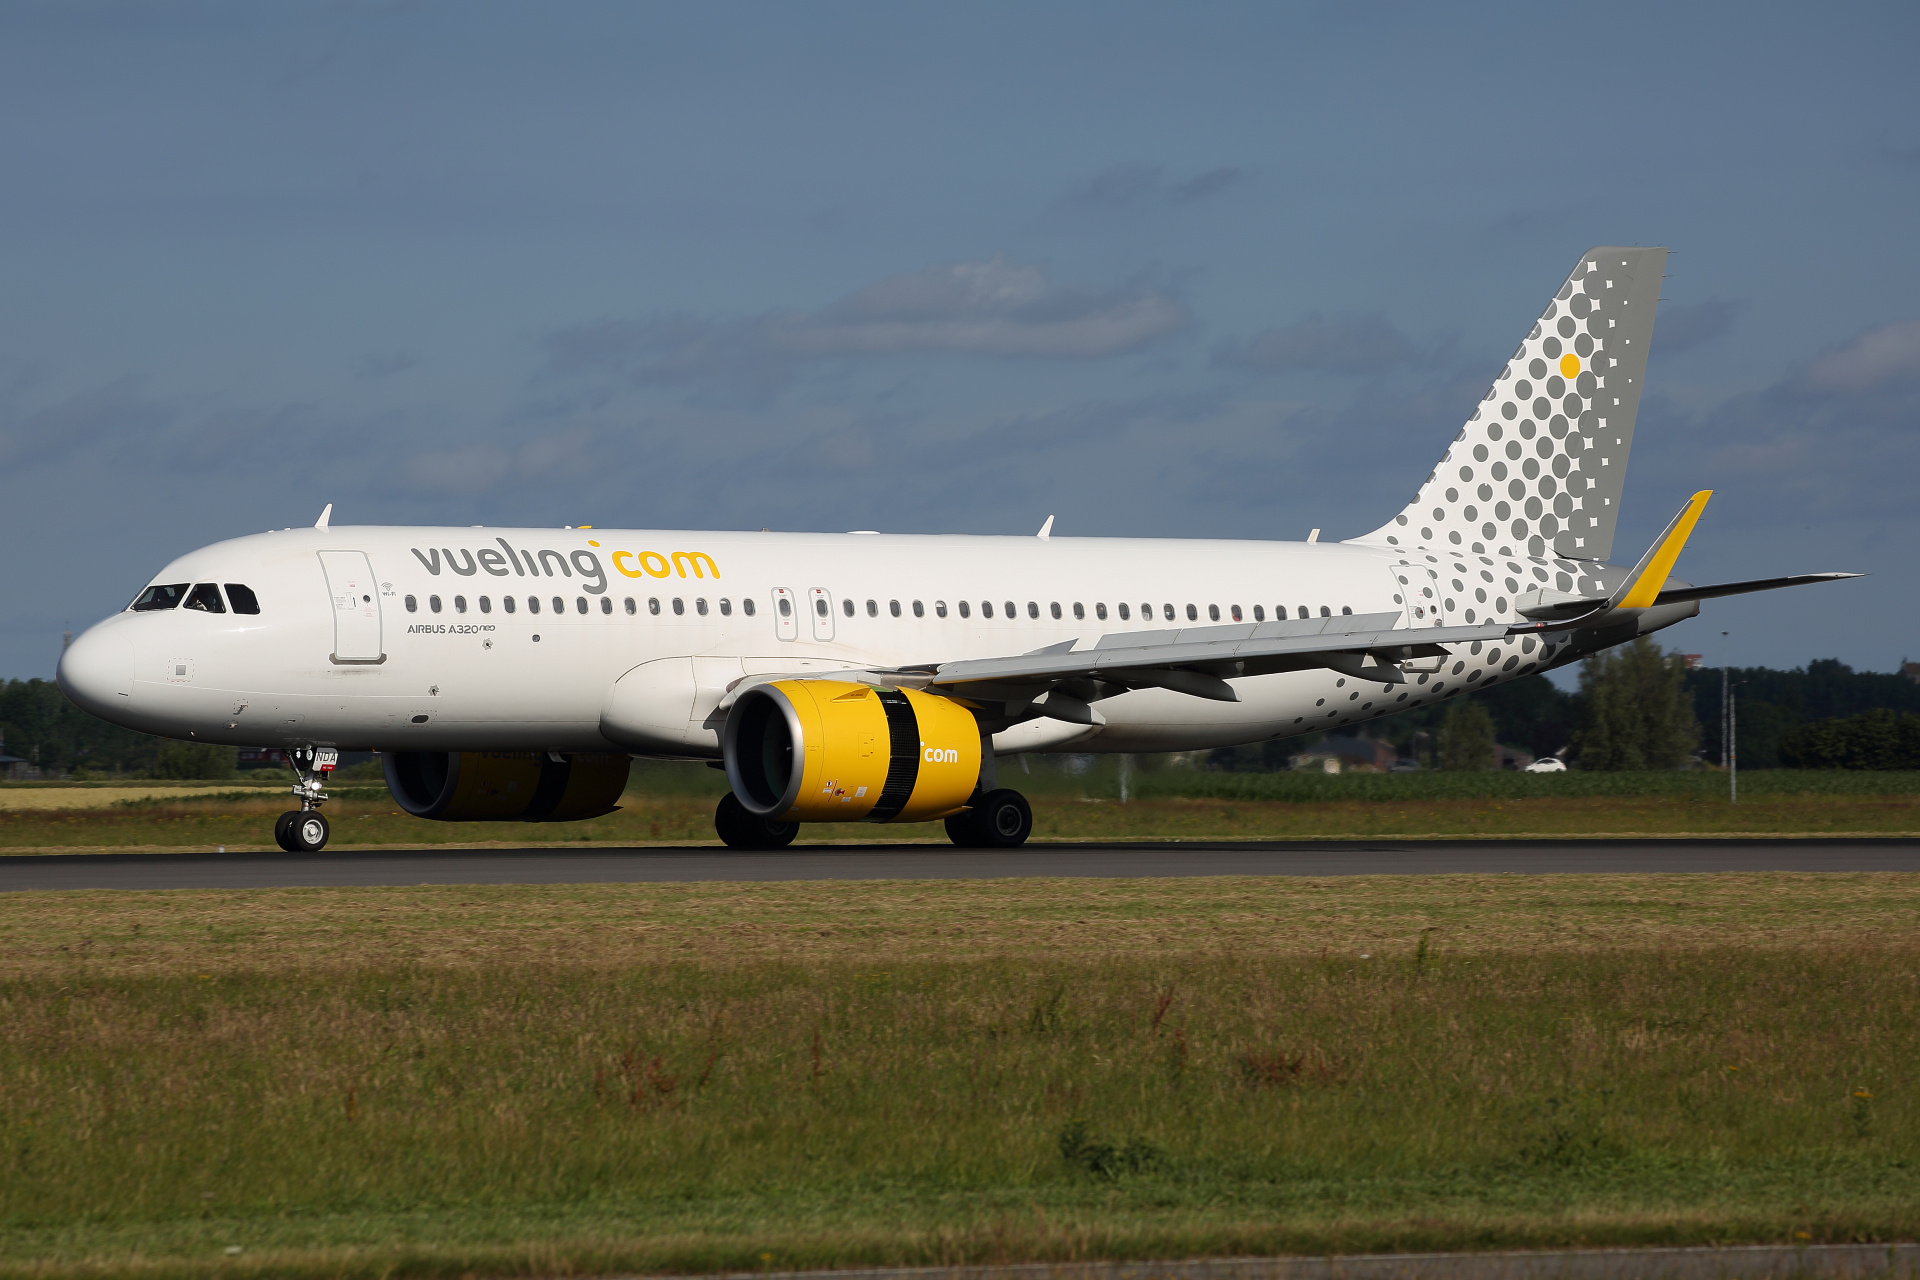 EC-NDA (Samoloty » Spotting na Schiphol » Airbus A320neo » Vueling Airlines)